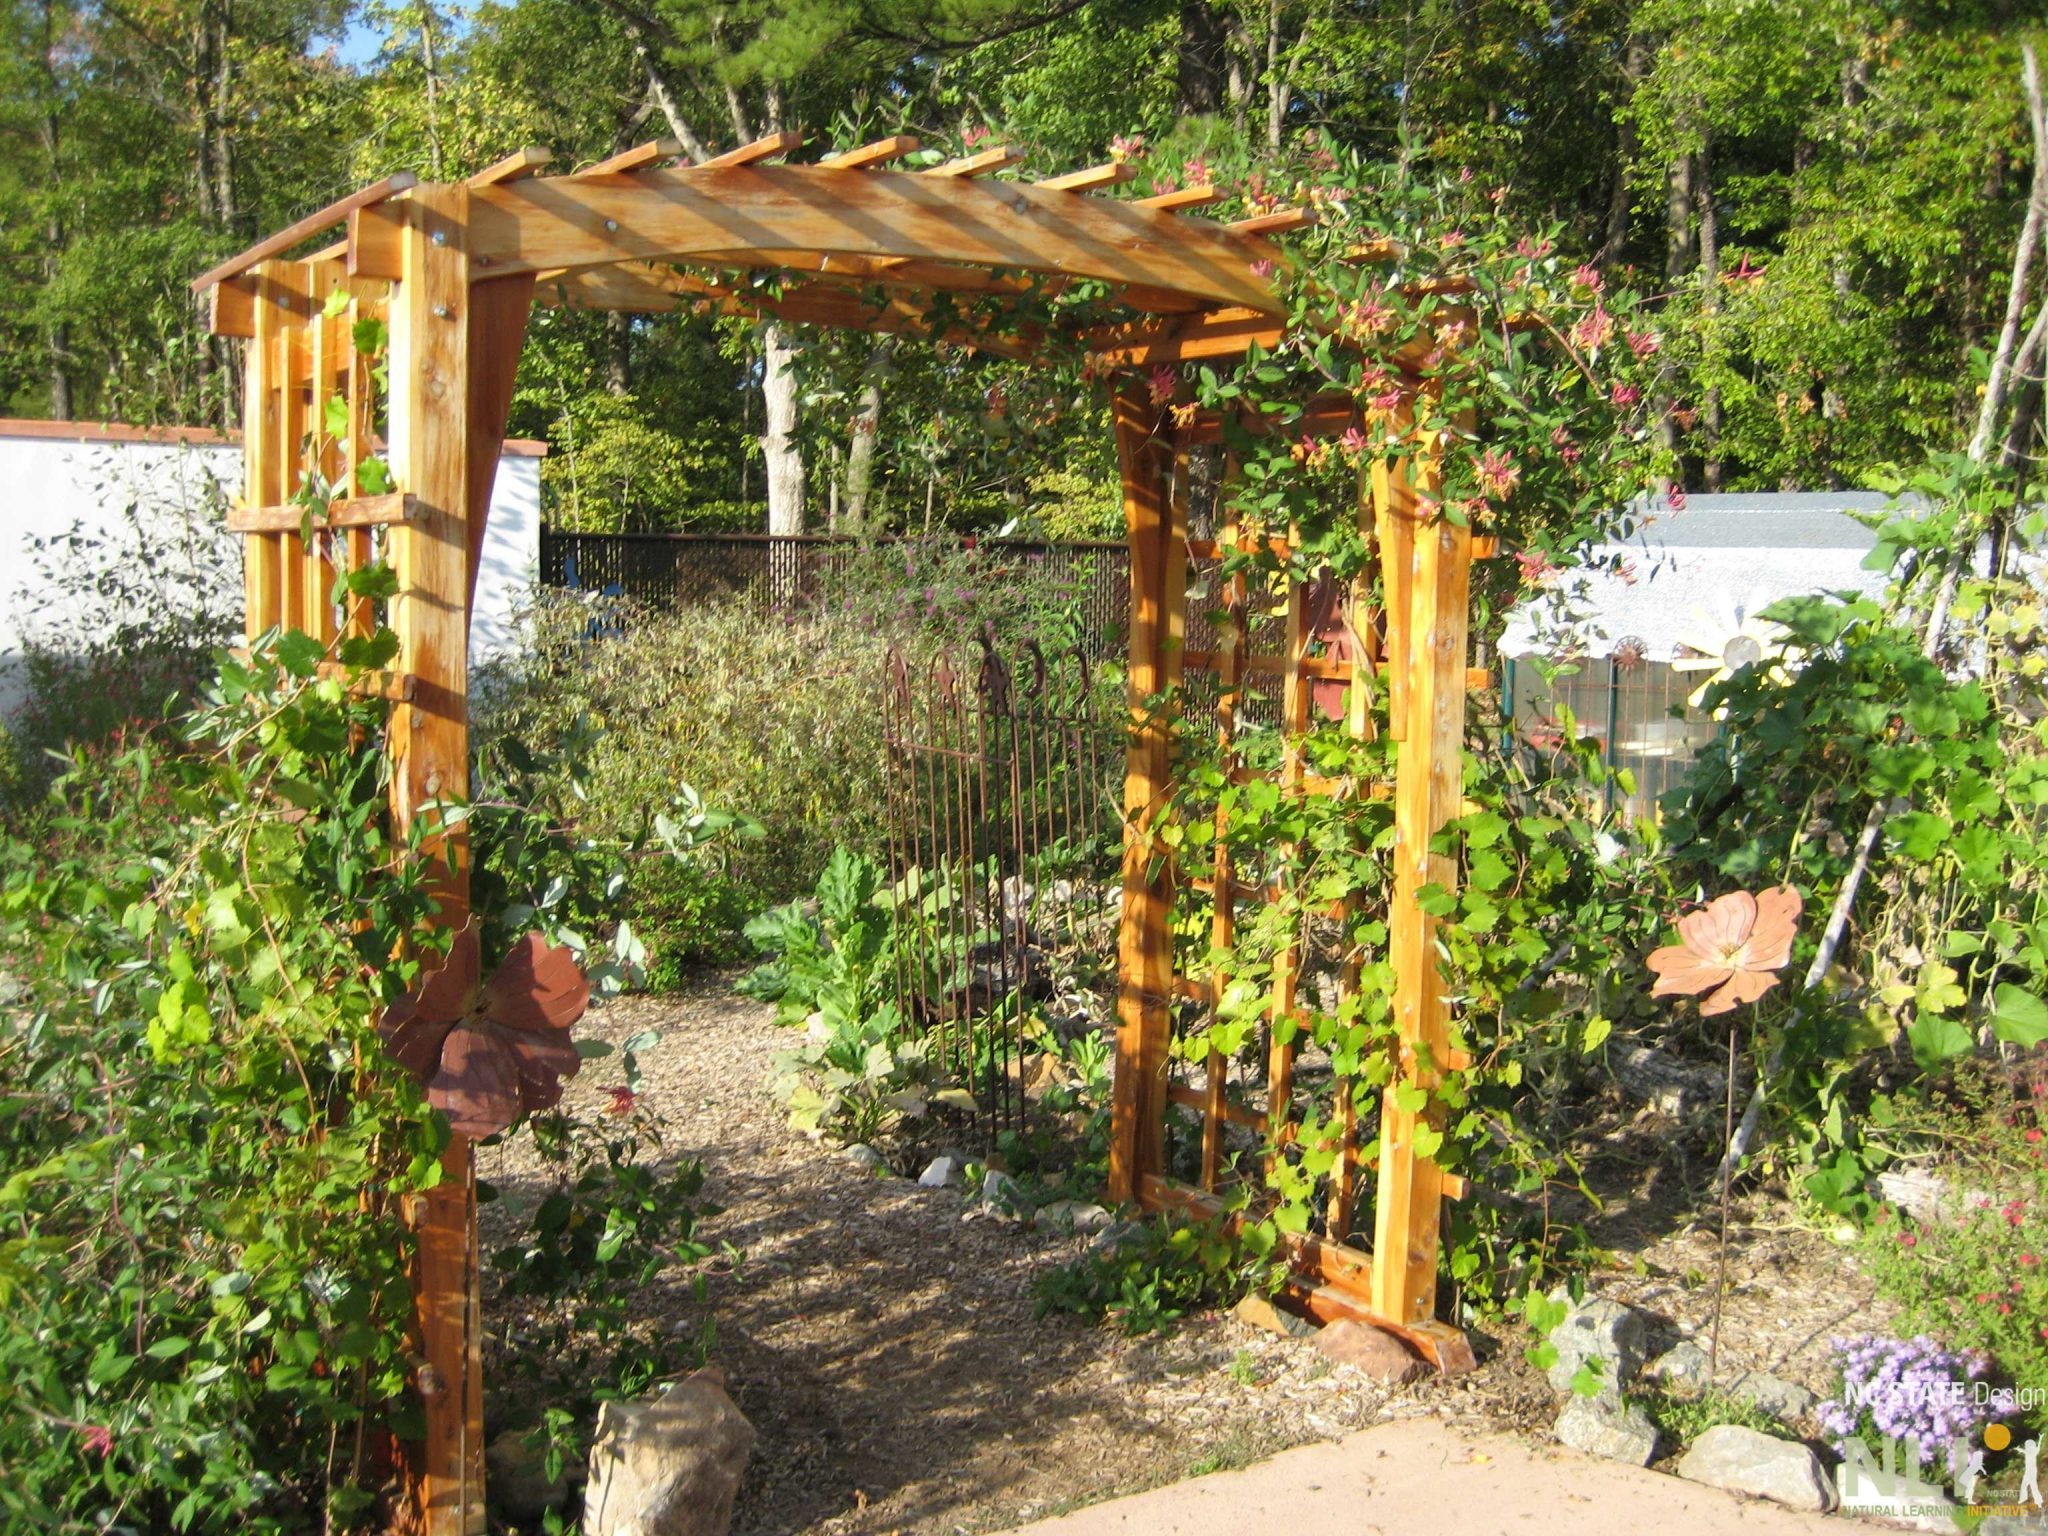 arbor with vines growing on it